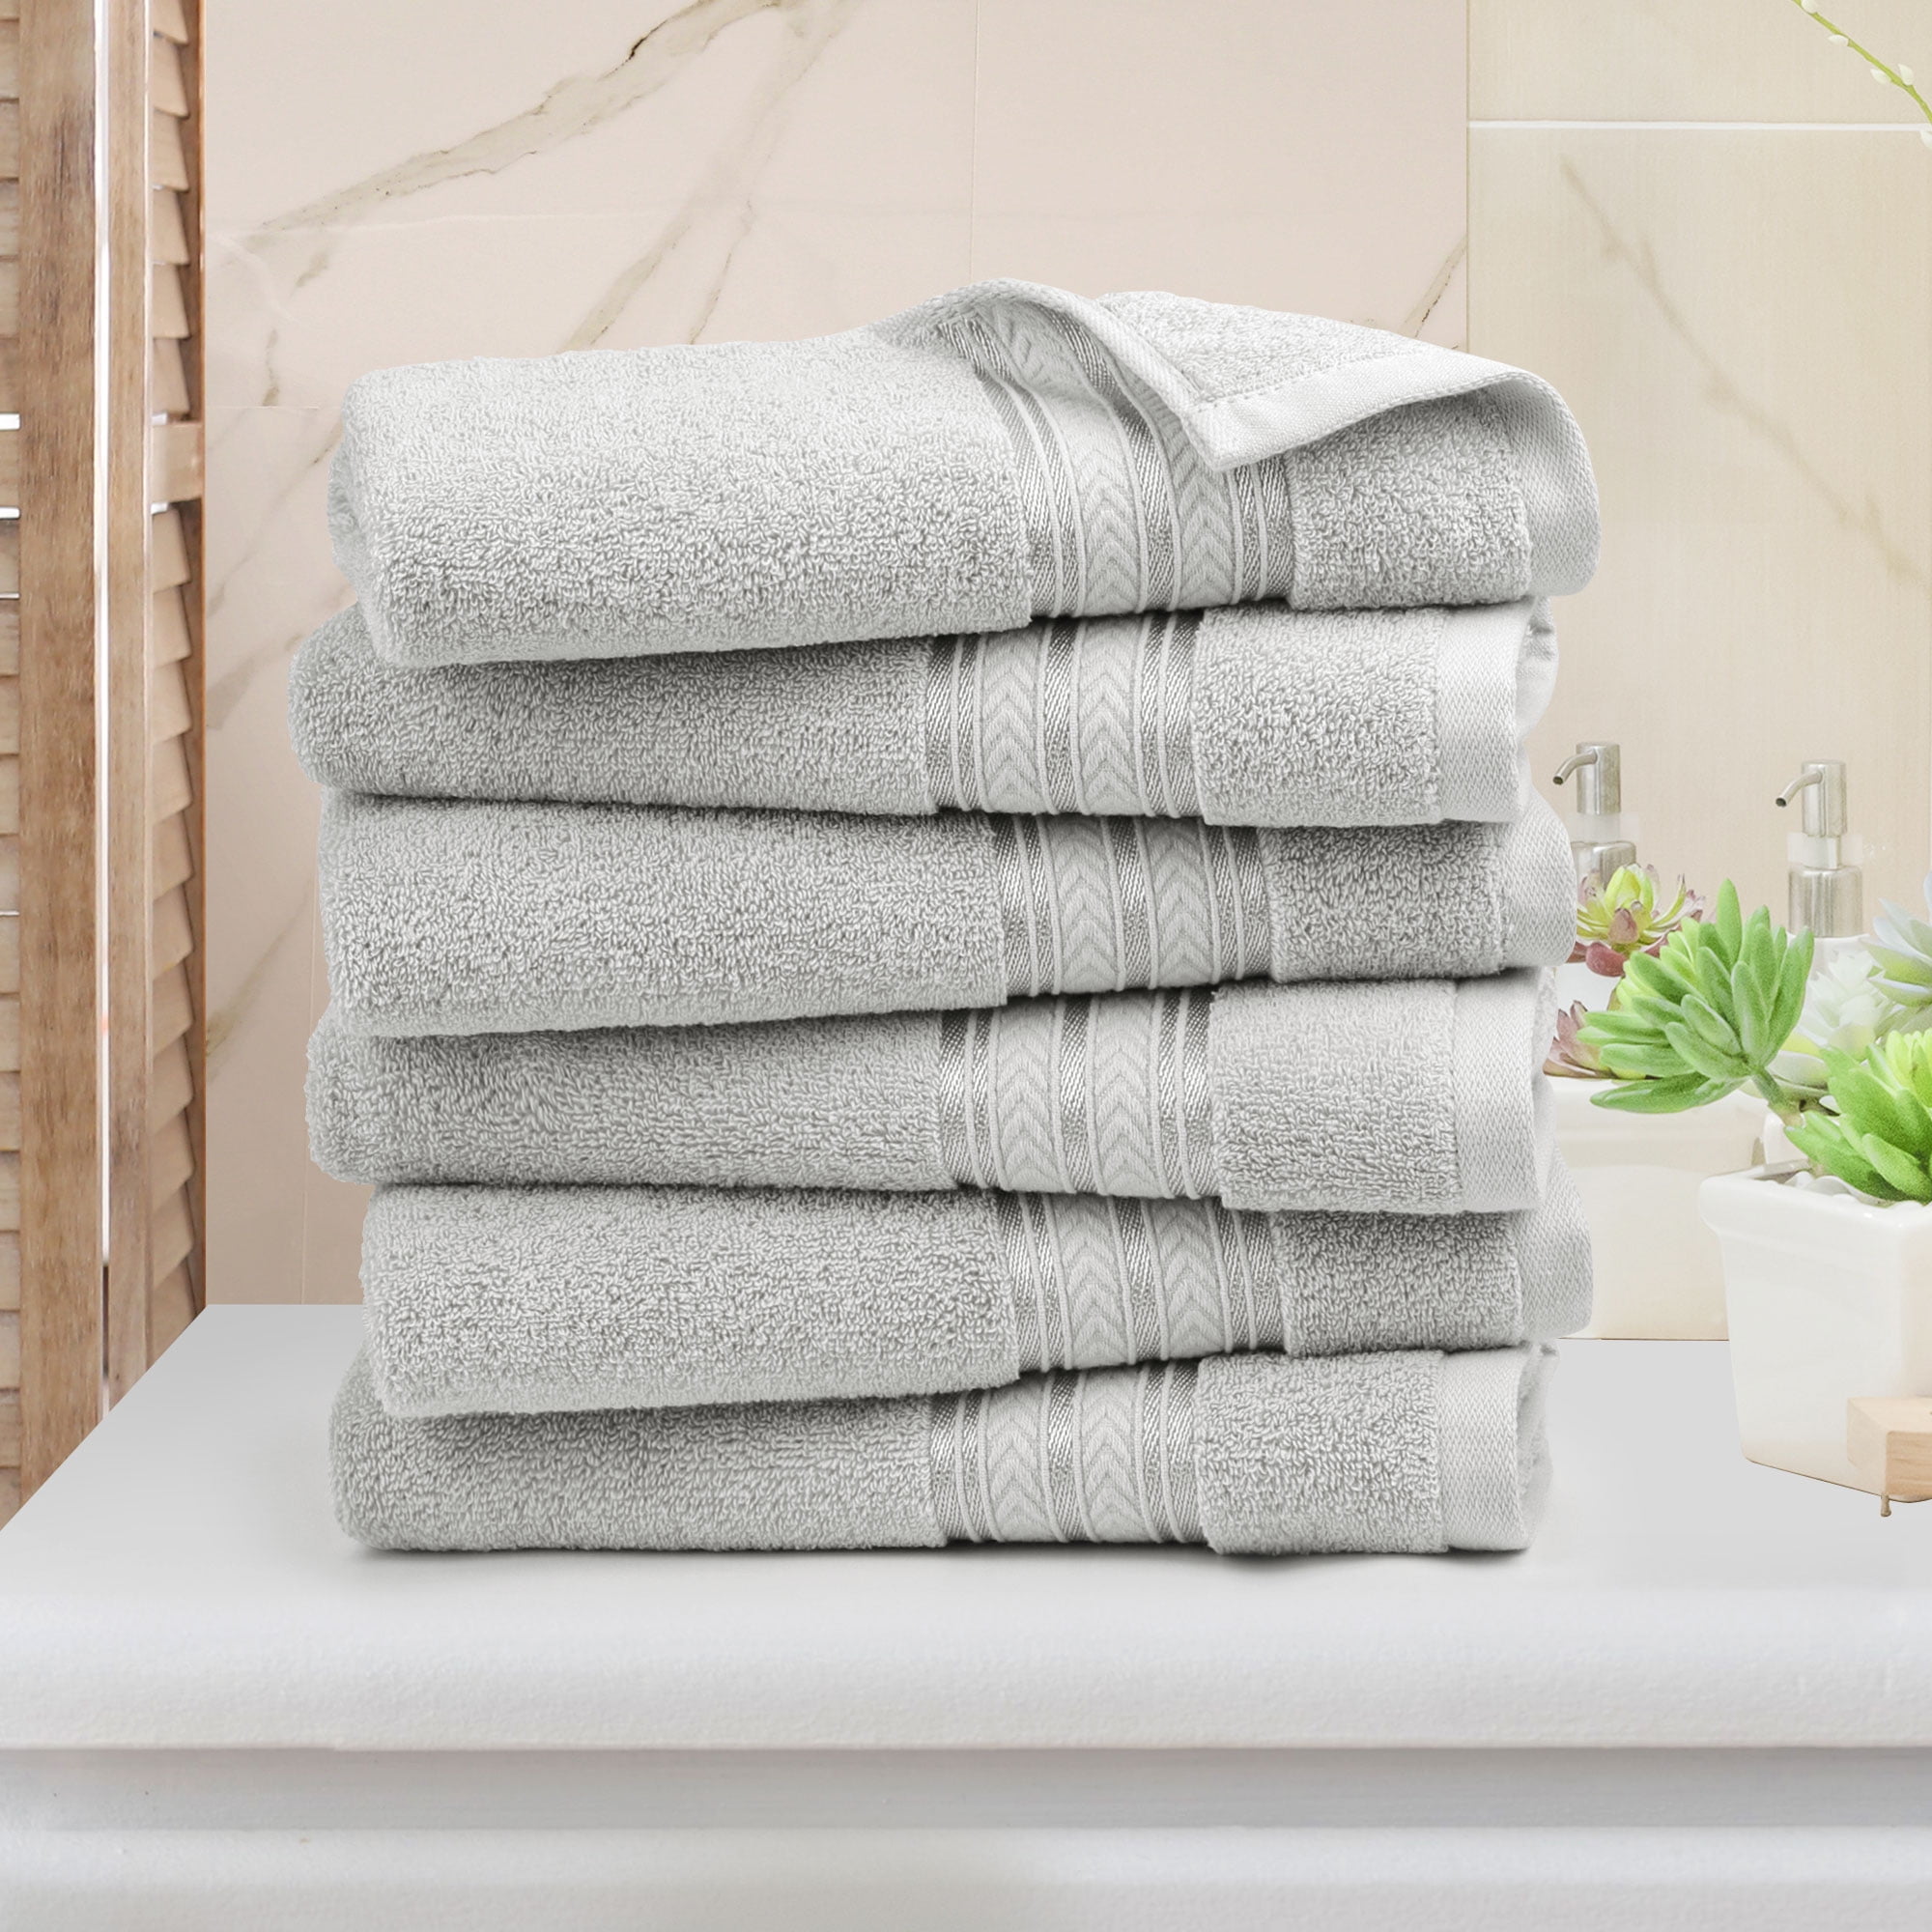 Pack Of 4* driSoft 100% Cotton Hand Towels 13 x 13 In In CORAL